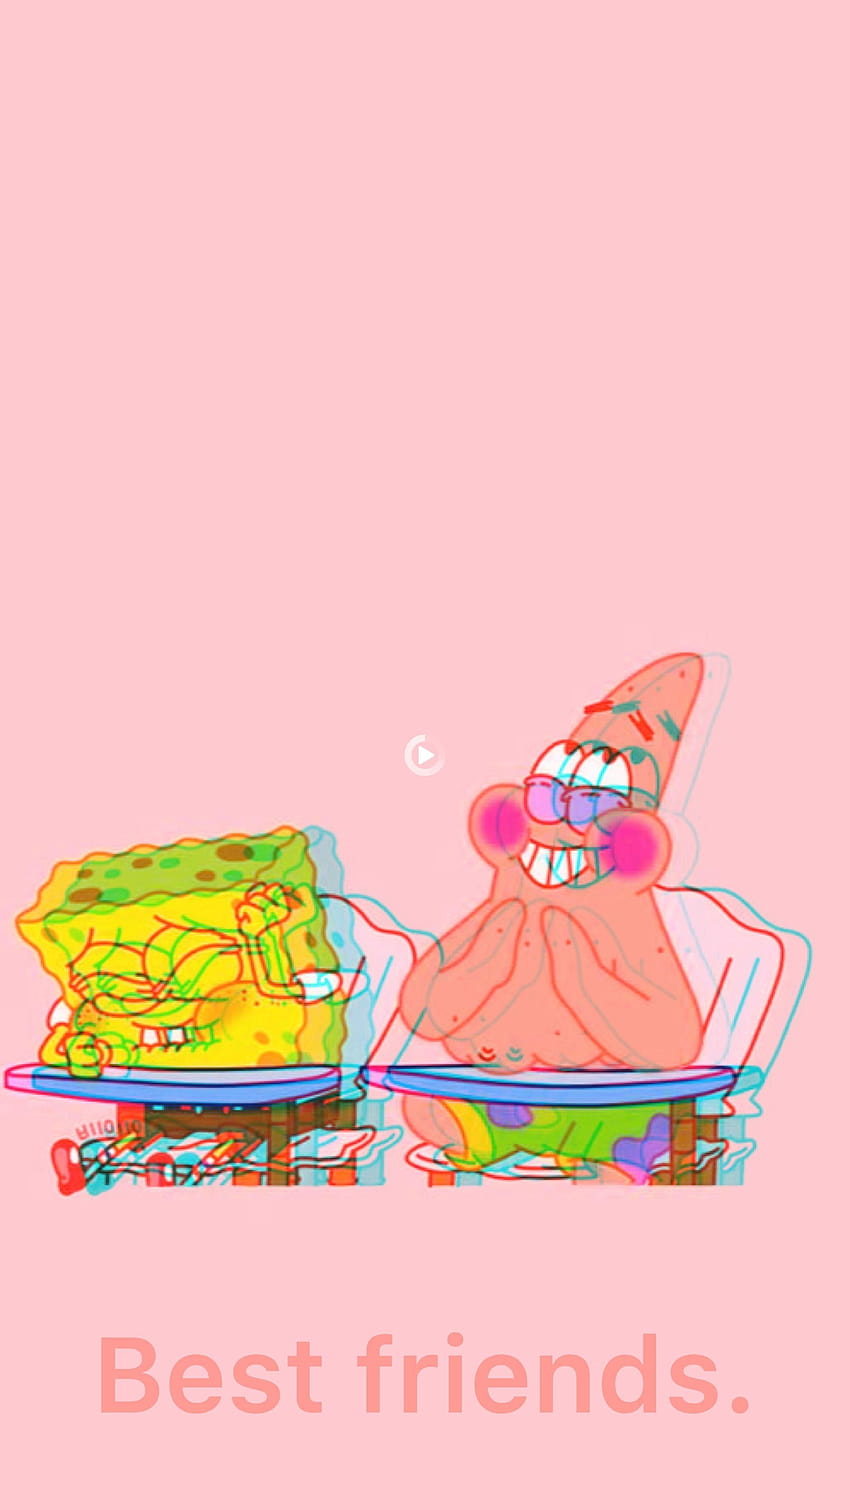 A cartoon sponge bob and patrick are sitting together - Bestie